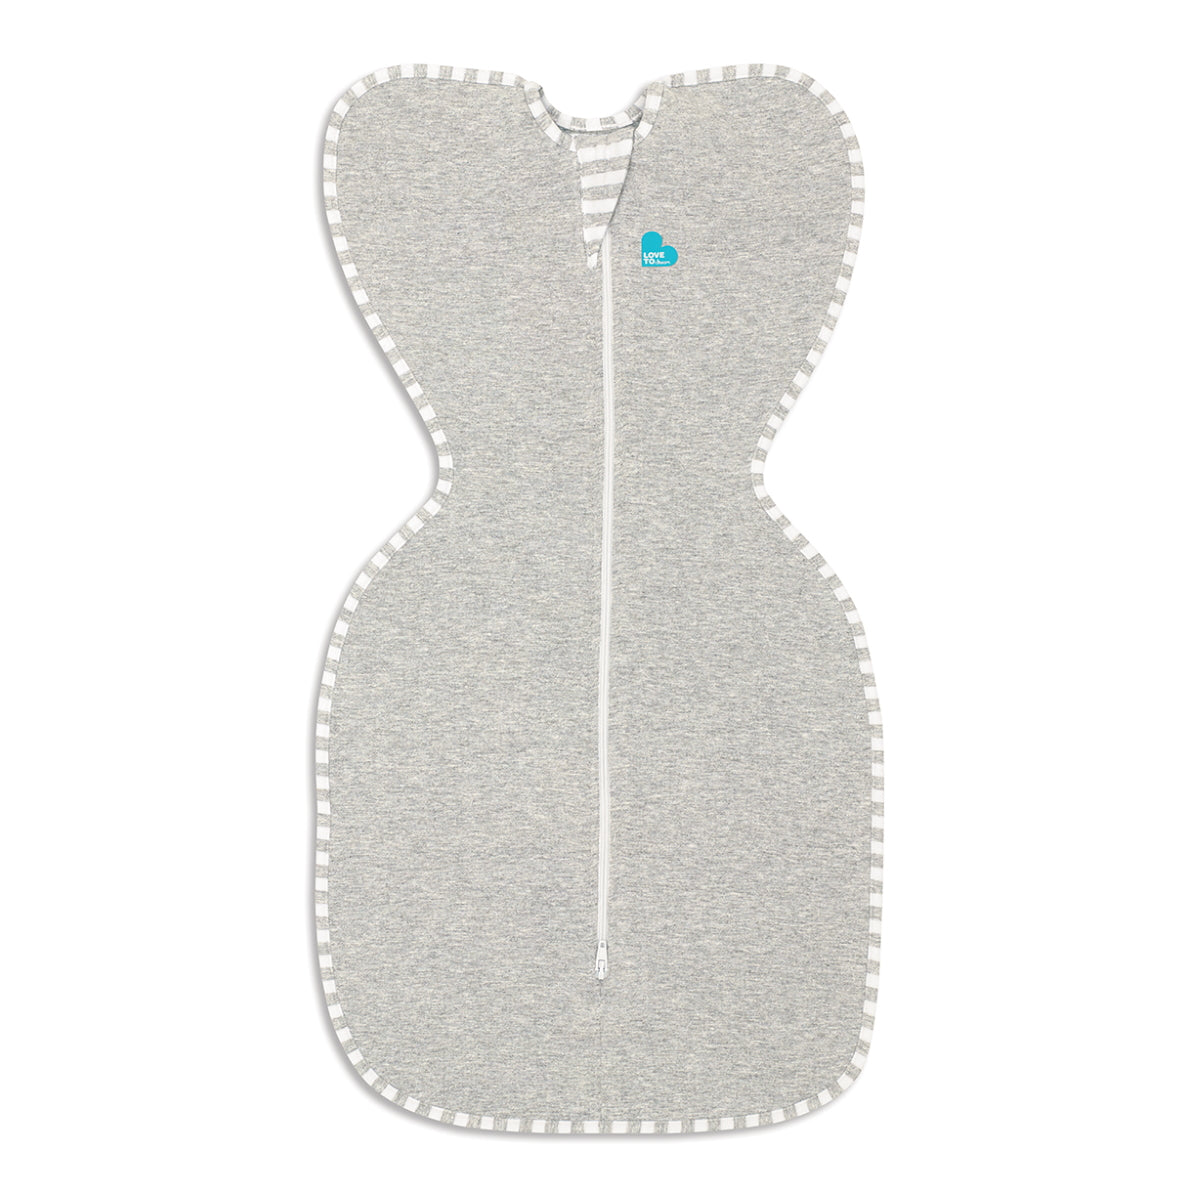 Love to Dream | Swaddle Up™ Original 1.0 TOG - Grey - Belly Beyond 